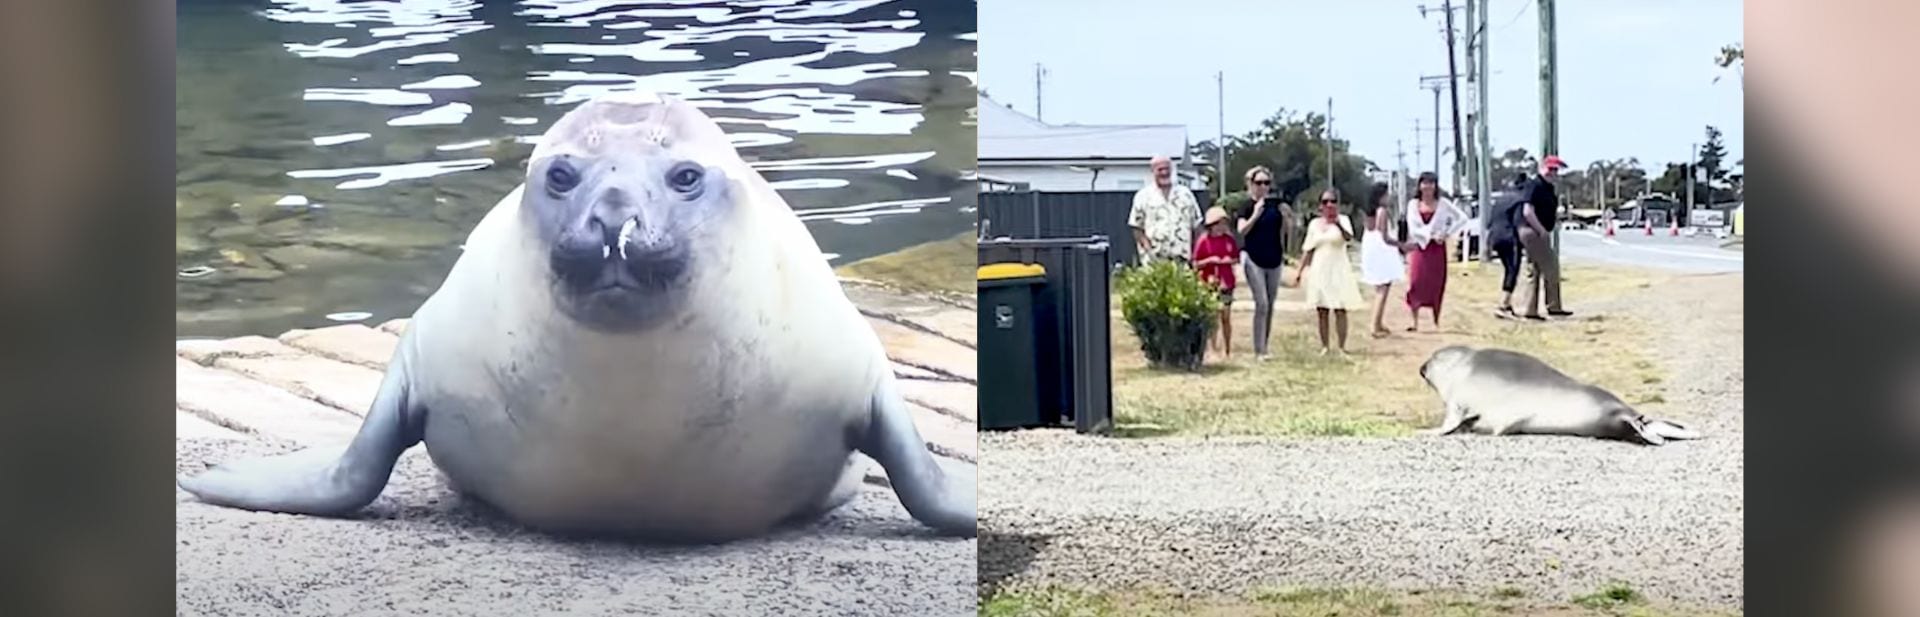 Local Seal Becomes Unlikely Social Media Icon In Australian Seaside Village